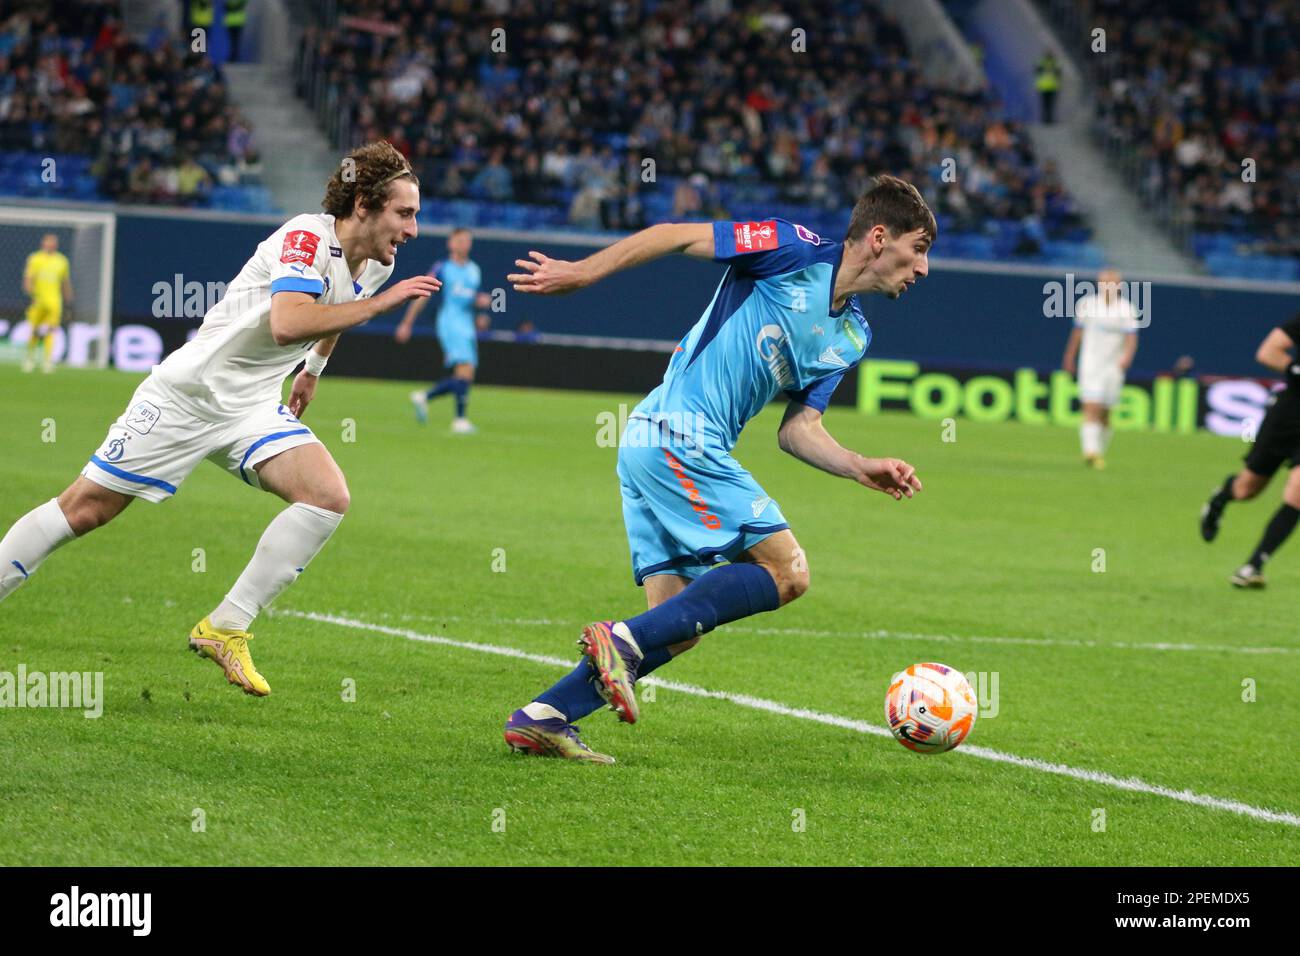 Saint Petersburg, Russia. 15th Mar, 2023. Zelimkhan Bakaev (No.7) of Zenit and Luka Gagnidze (No.34) of Dynamo in action during the Russian Cup 2022/2023 football match between Zenit Saint Petersburg and Dynamo Moscow at Gazprom Arena. Final score; Zenit 1:1 Dynamo (4:5, penalty shootout). (Photo by Maksim Konstantinov/SOPA Images/Sipa USA) Credit: Sipa USA/Alamy Live News Stock Photo